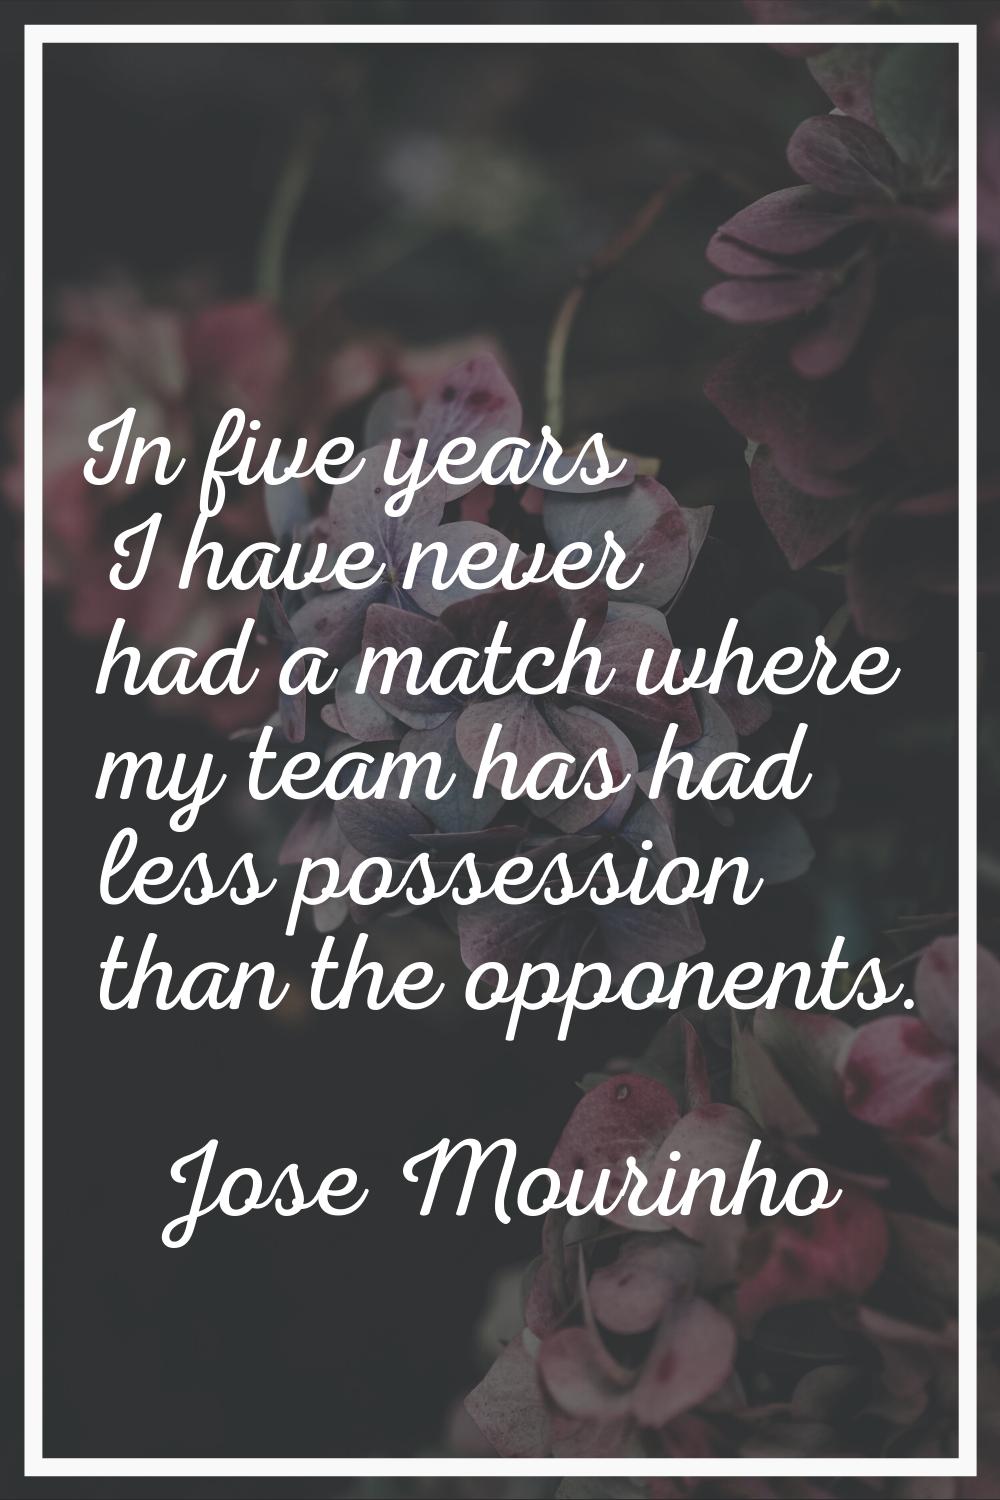 In five years I have never had a match where my team has had less possession than the opponents.